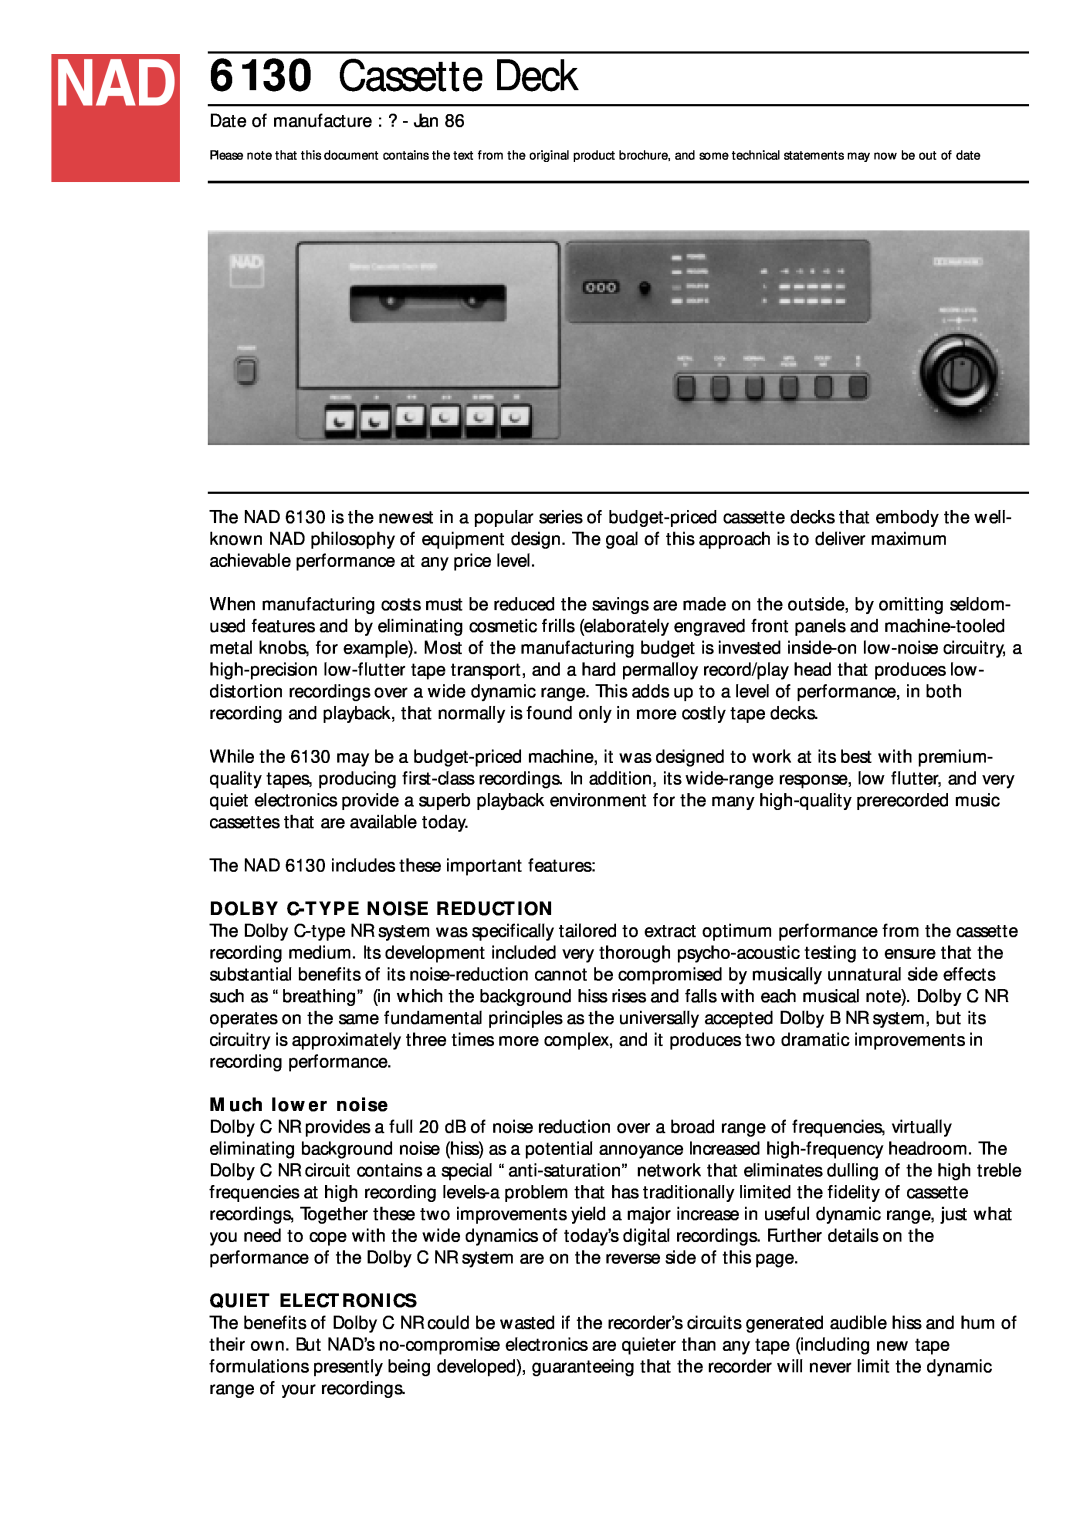 NAD 6130 brochure Dolby C-Typenoise Reduction, Much lower noise, Quiet Electronics, Cassette Deck 